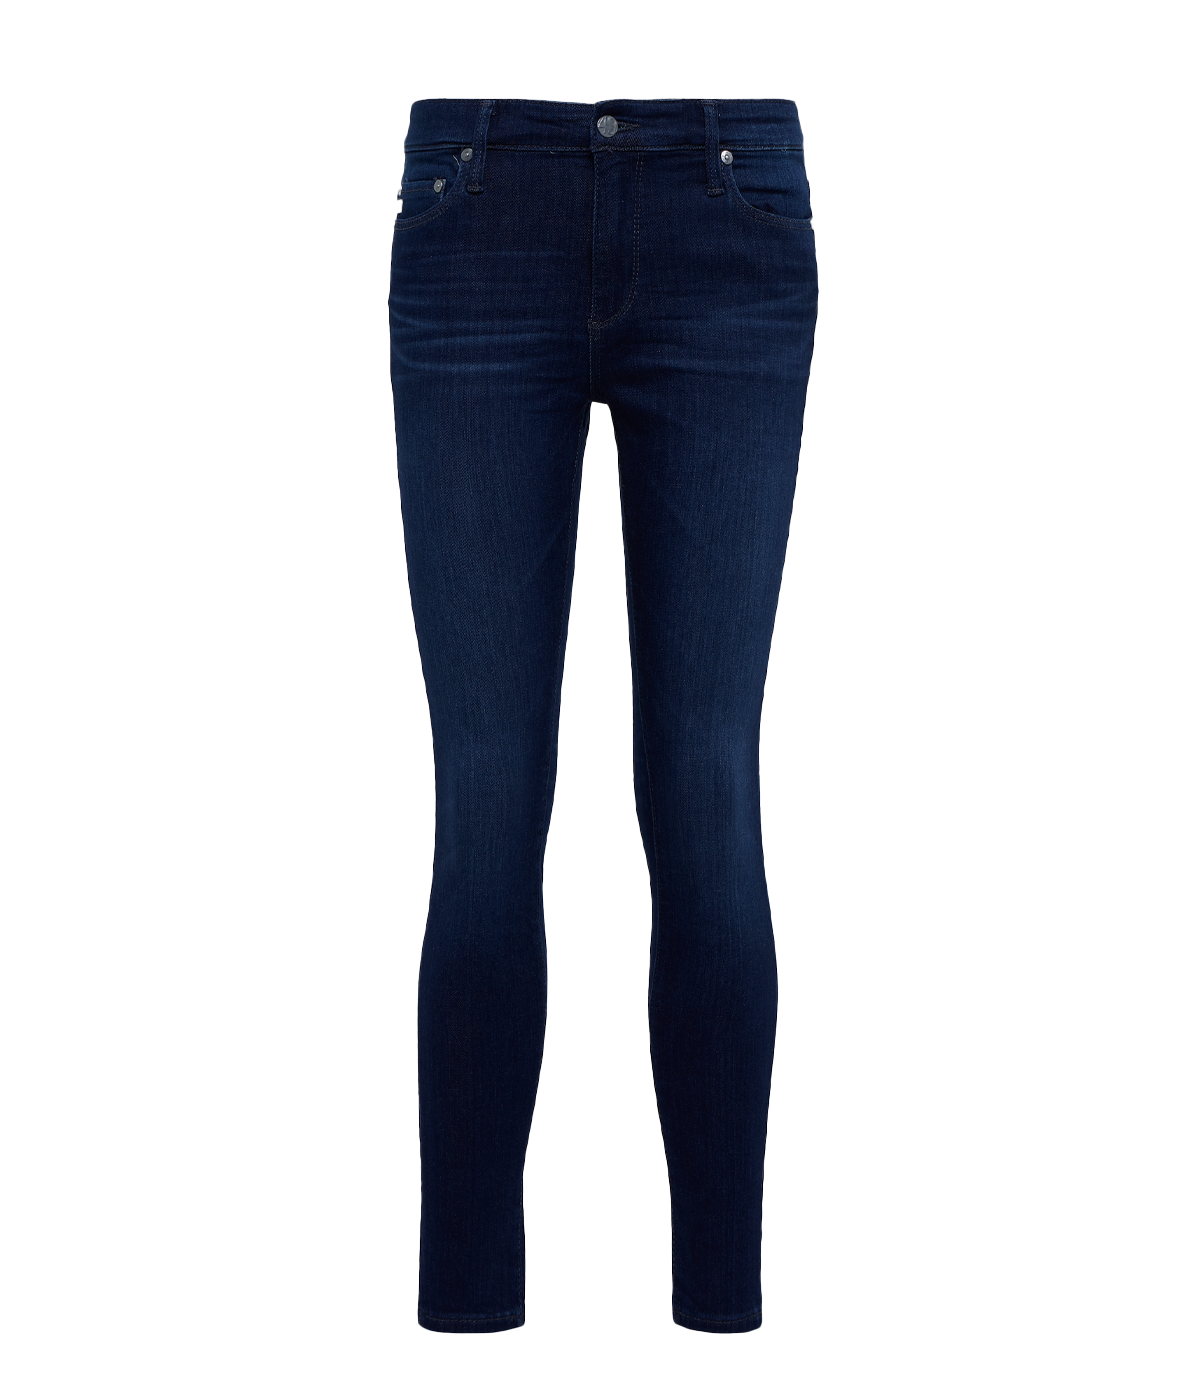 The Farrah Skinny Ankle Jean in Enchantment